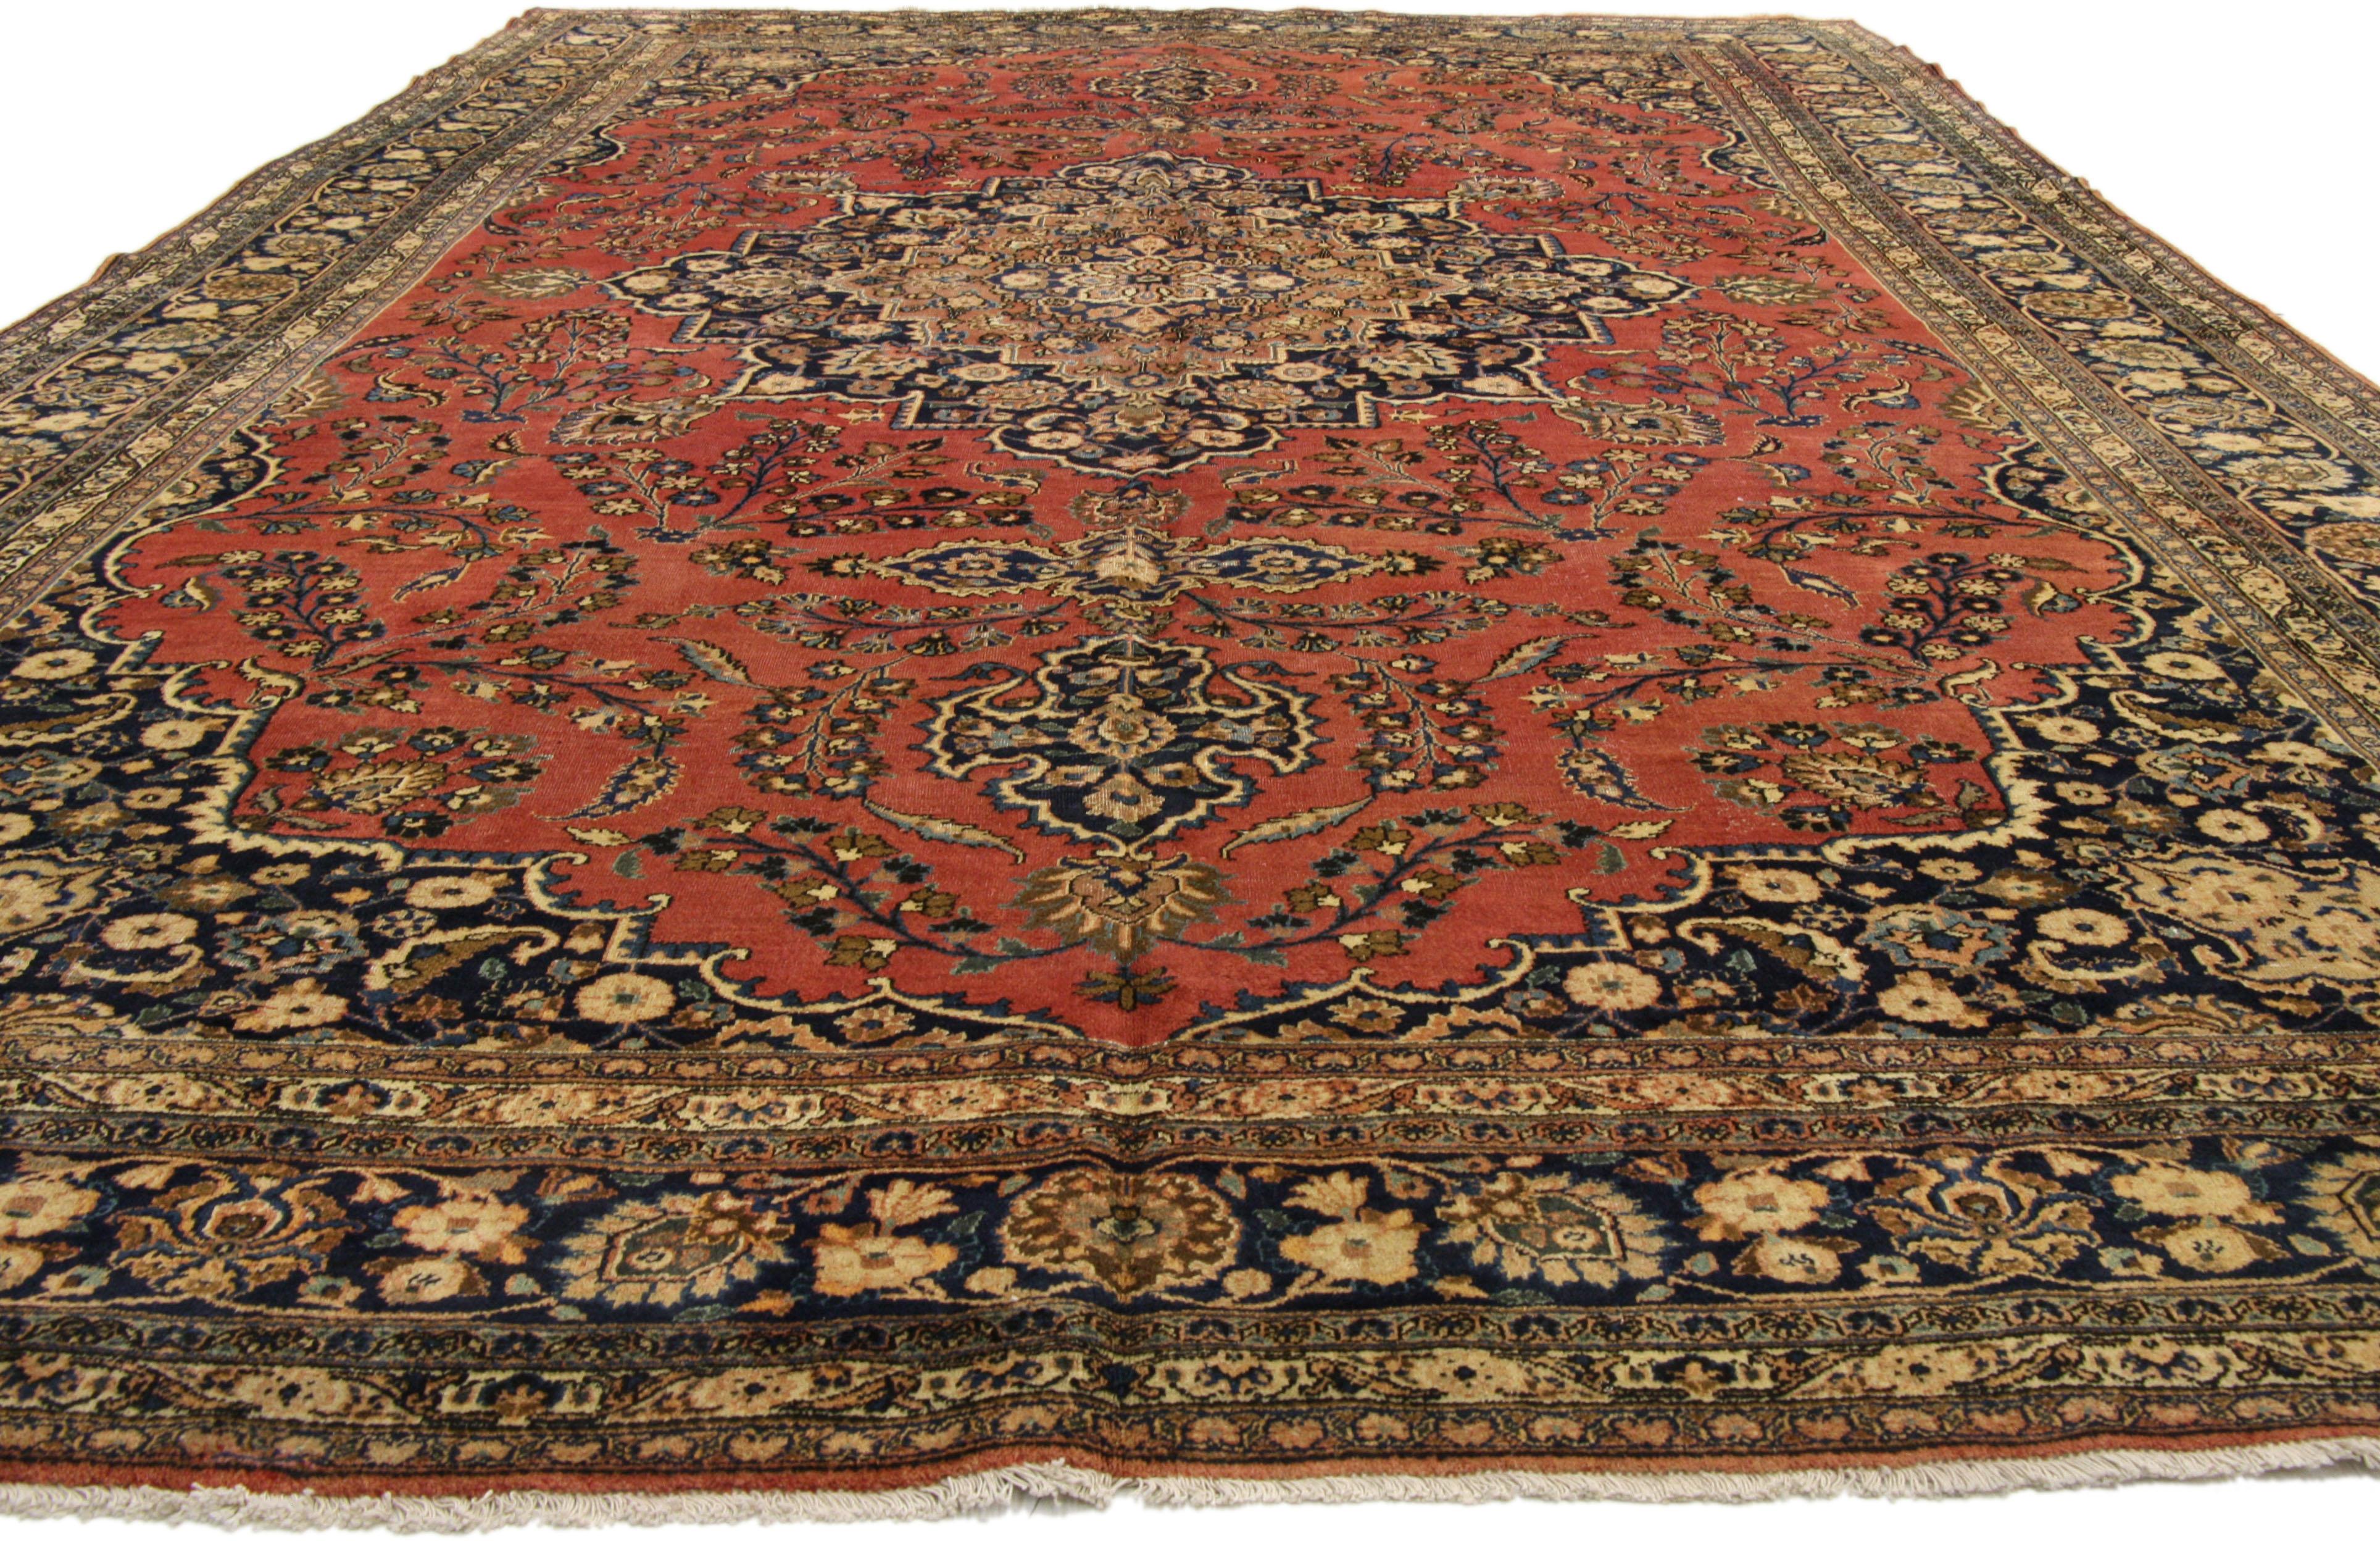 75598, vintage Persian Mashhad Gallery rug with traditional Jacobean style. This hand-knotted wool vintage Persian Mashhad rug features a cusped 16-point Mashhad medallion flanked by cartouche-style palmette finials at each end floating among